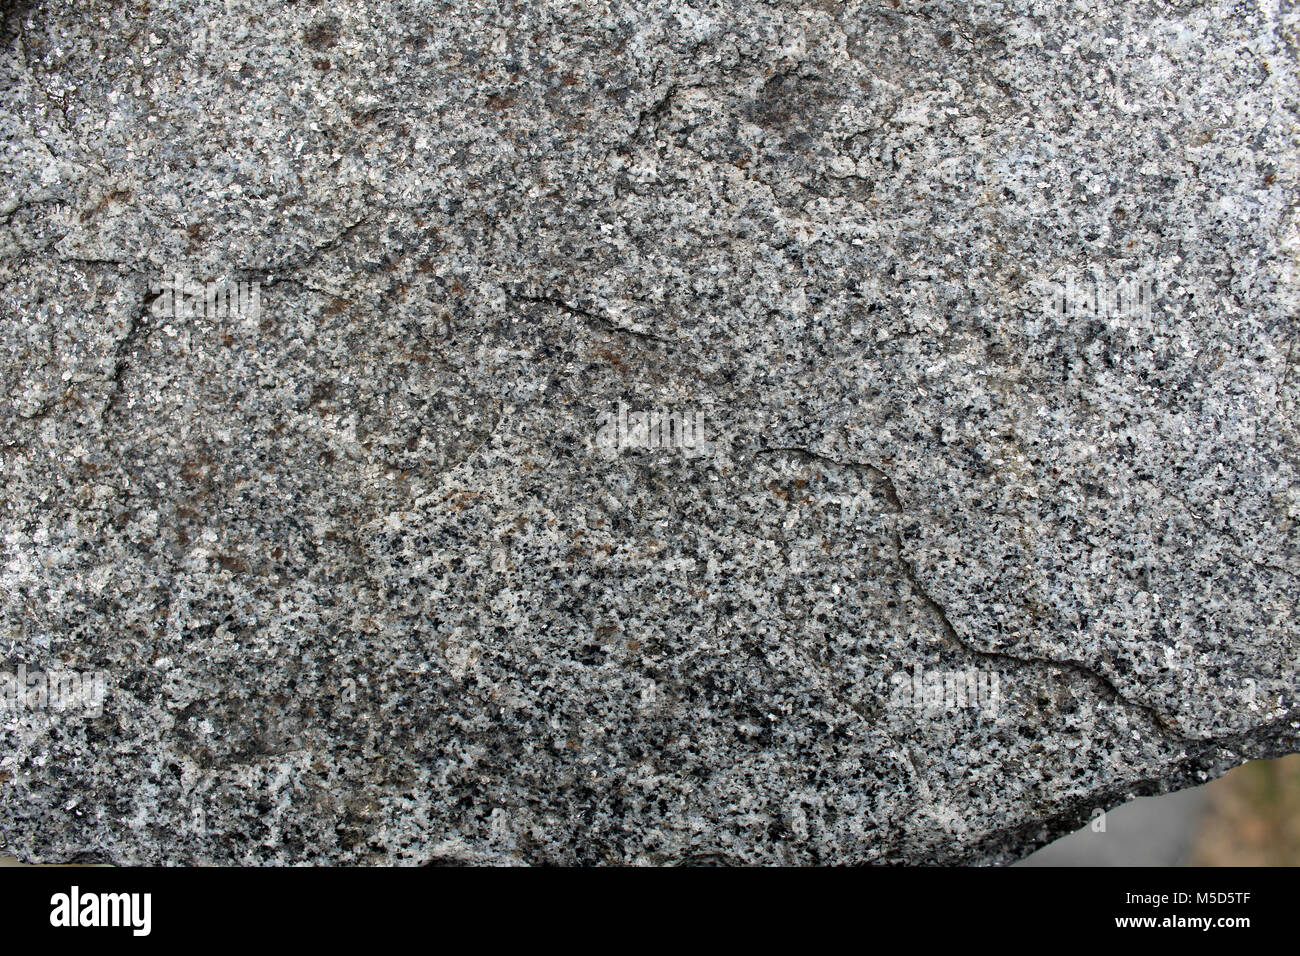 Fine-grained rock surface close up Stock Photo